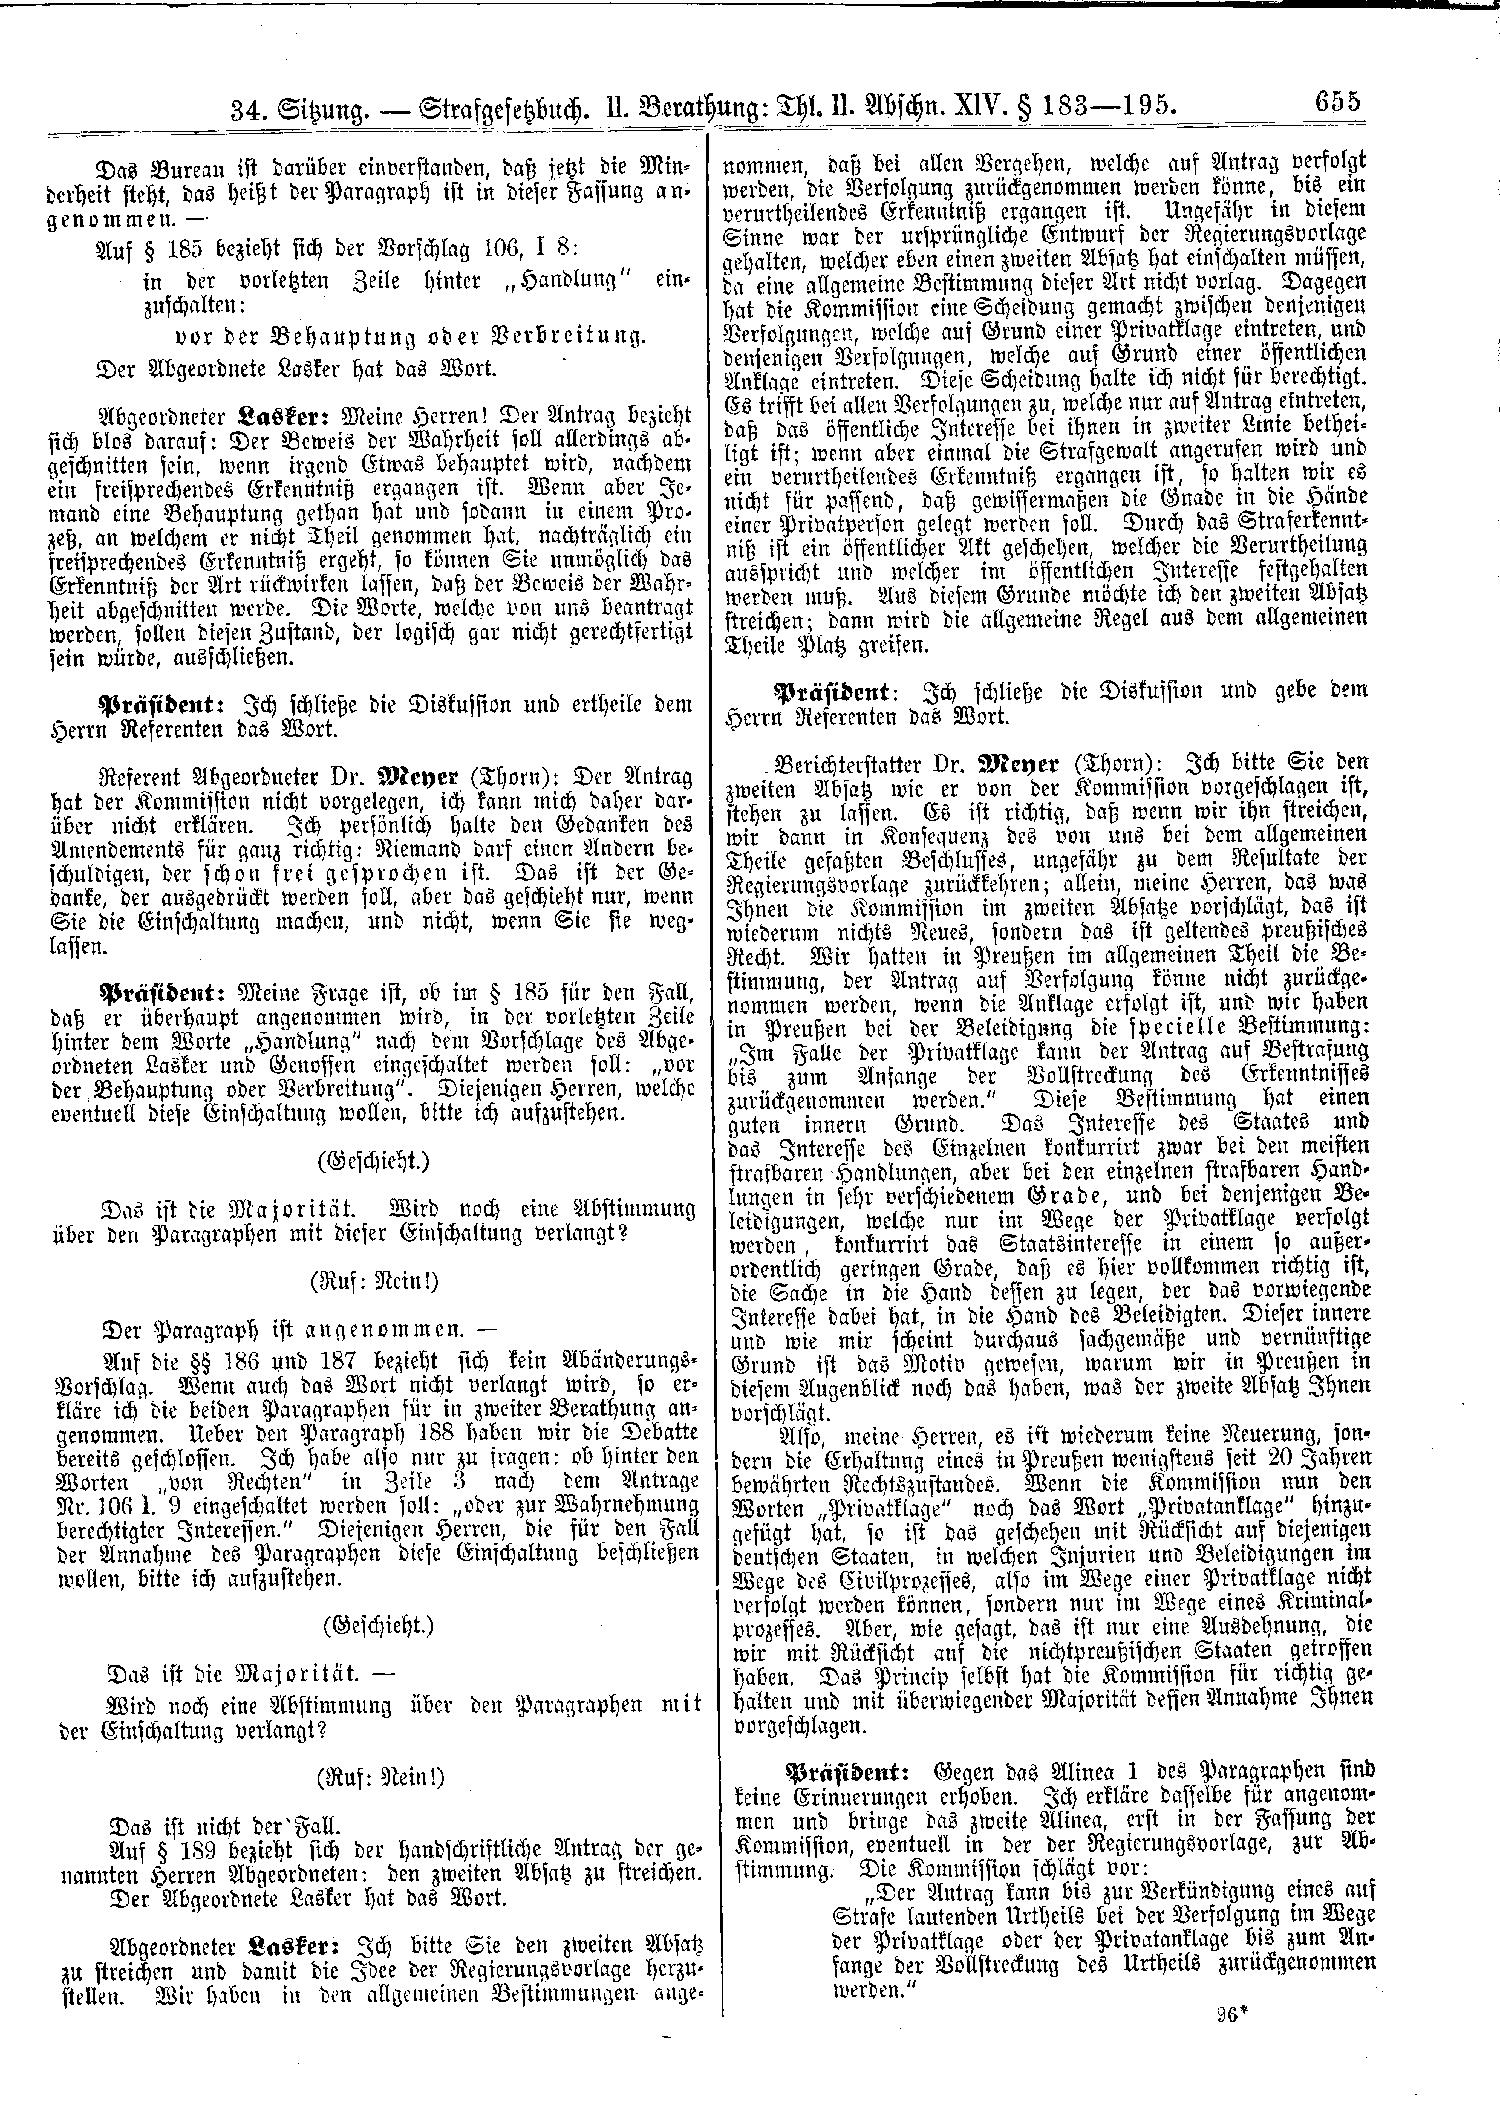 Scan of page 655